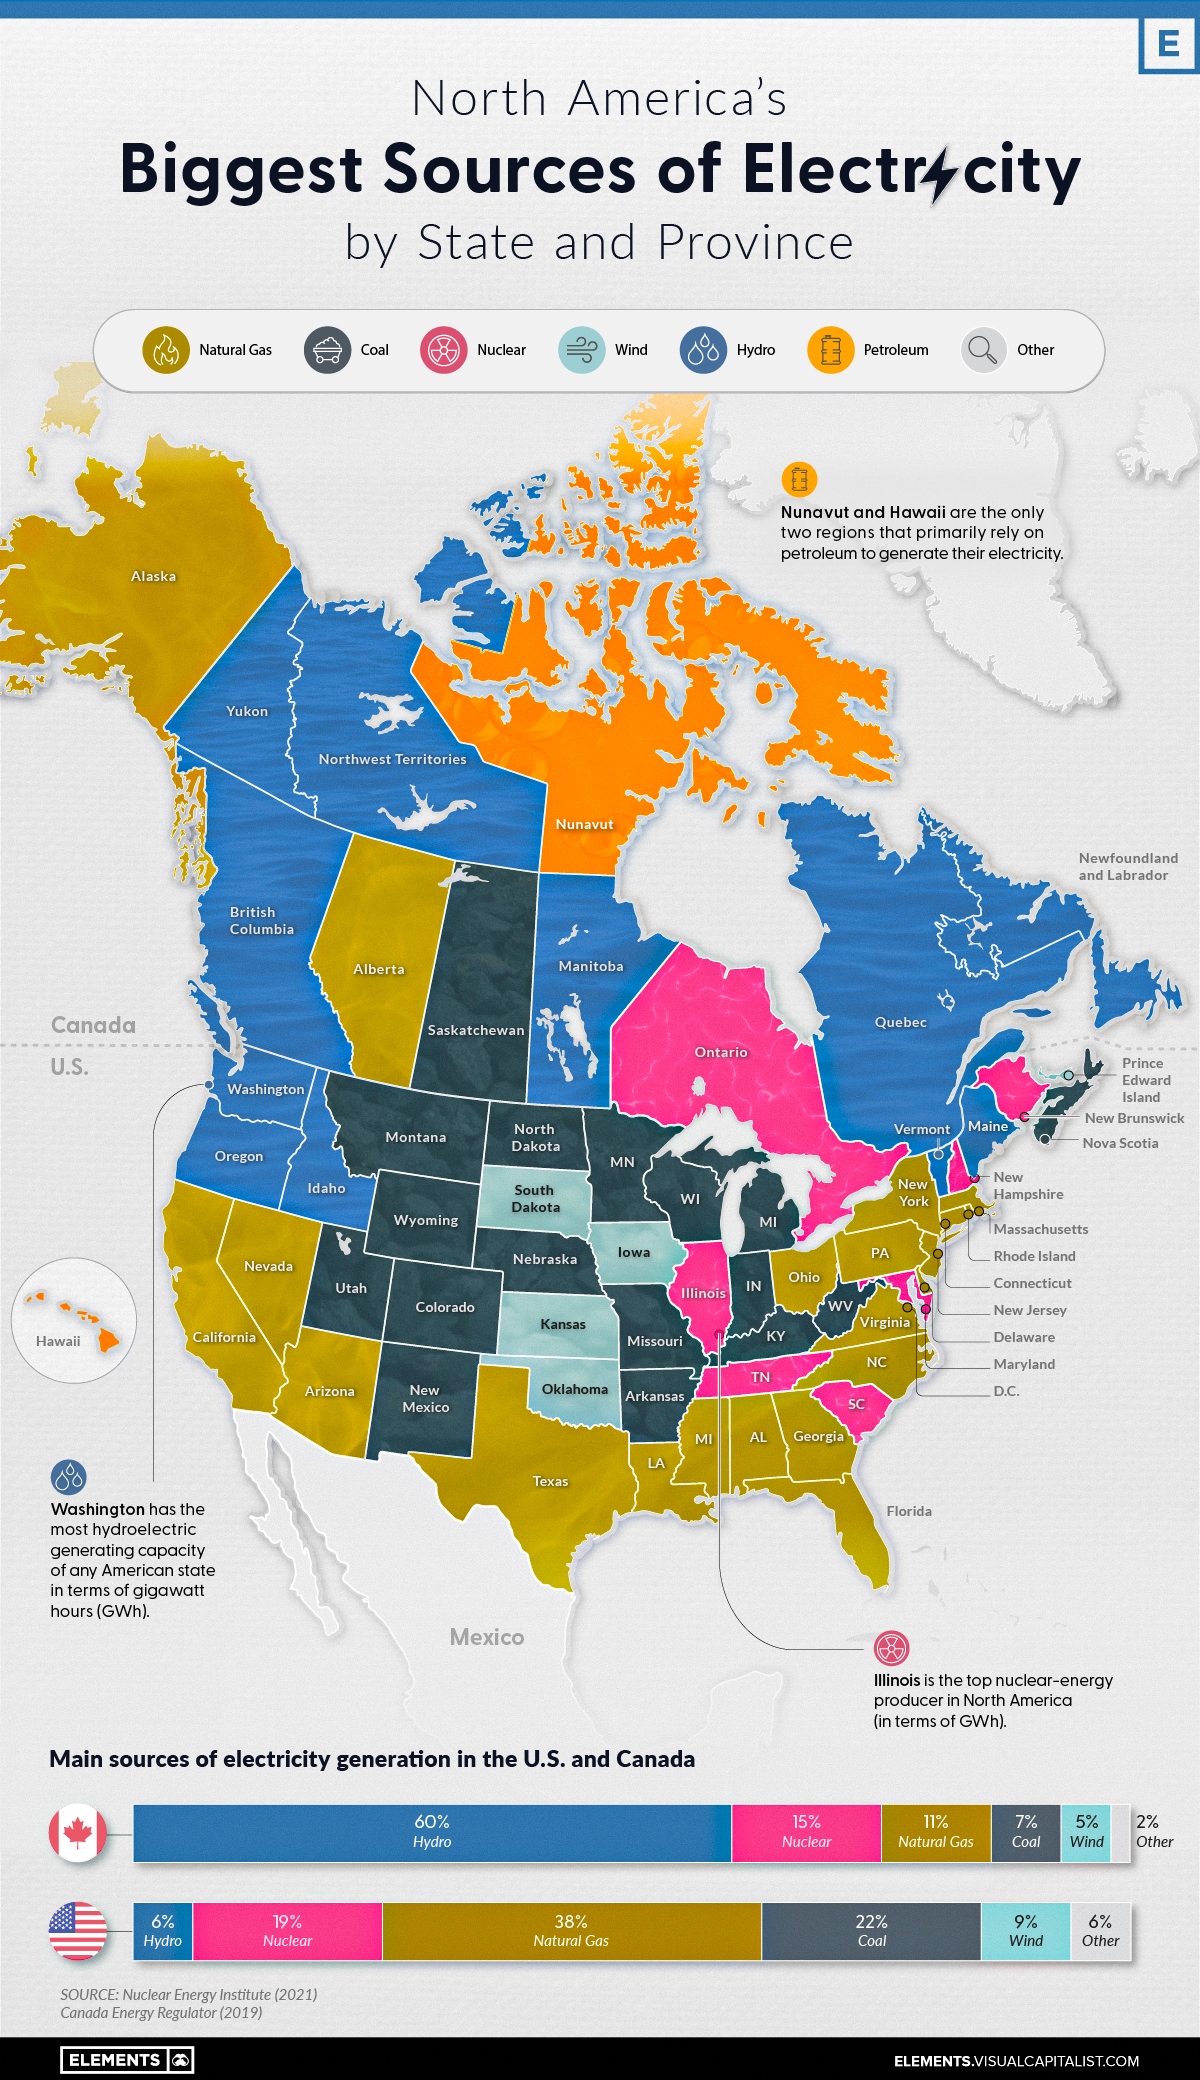 Visual Capitalist - Mapped: Biggest Sources of Electricity by State and Province